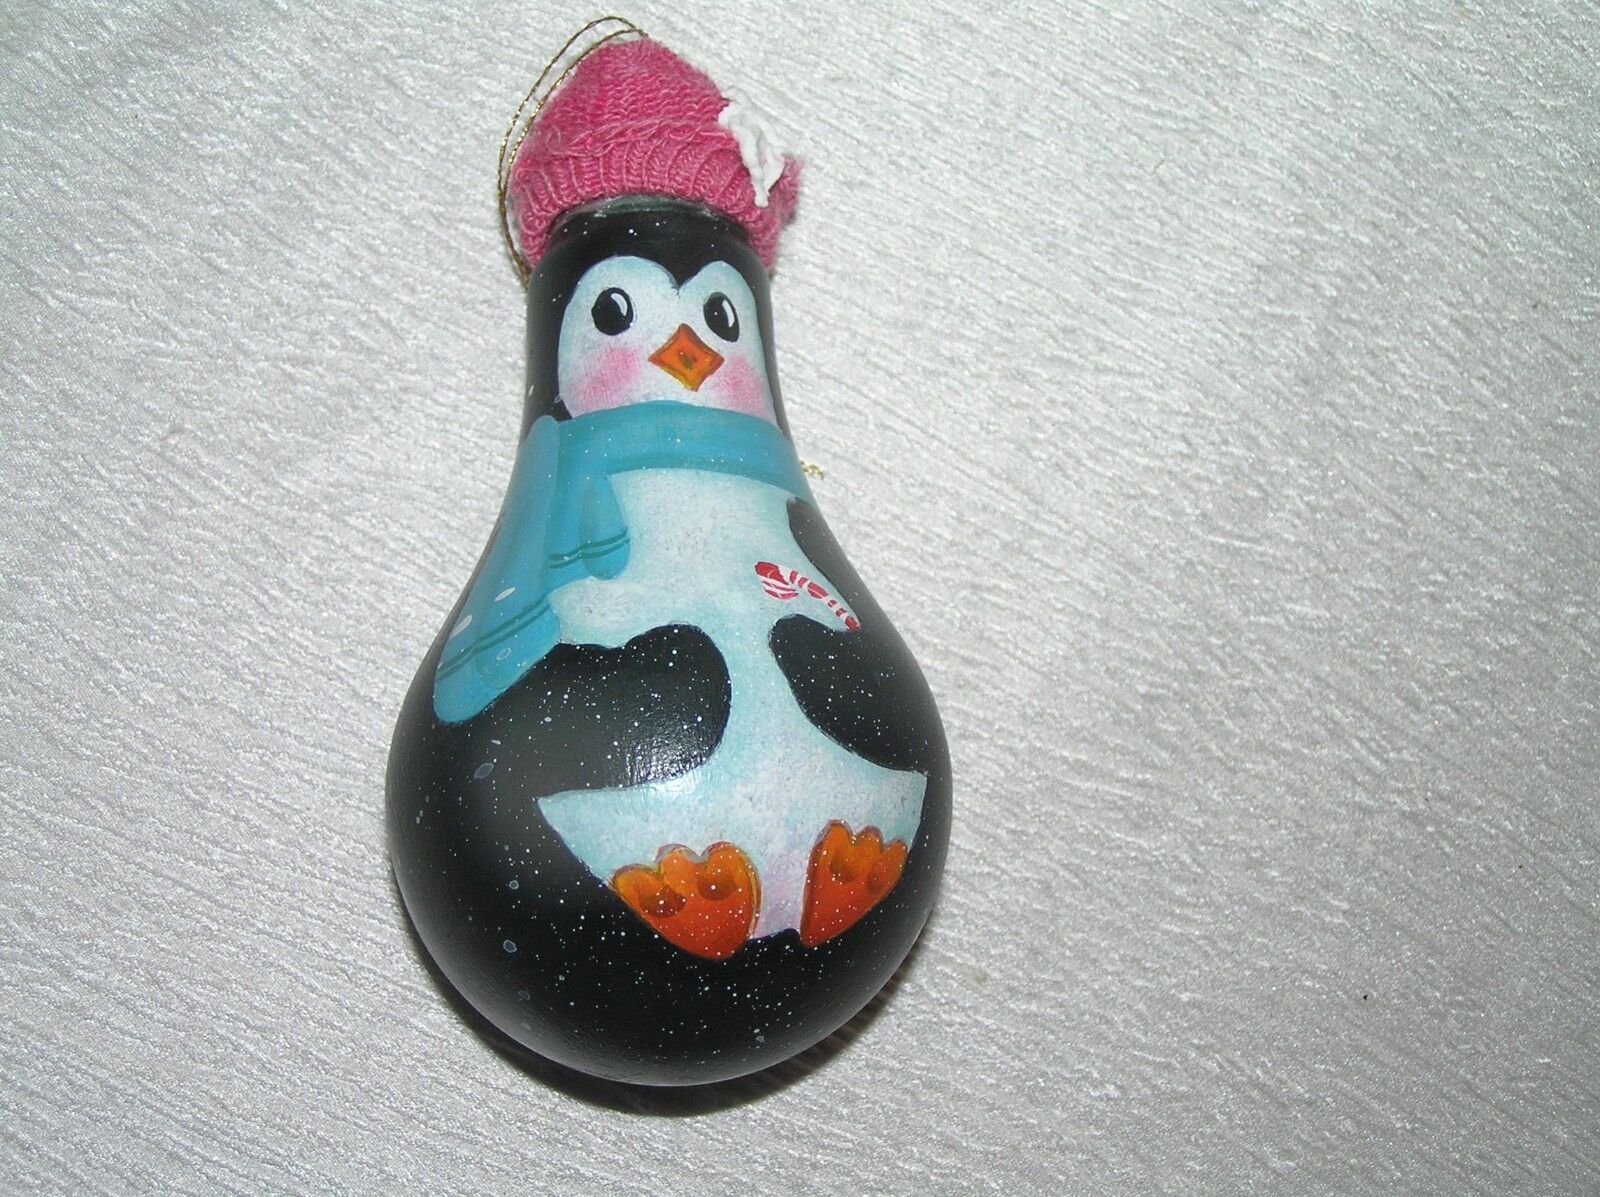 Repurposed Painted Penguin w Knit Cap Light Bulb Holiday Christmas Tree Ornament